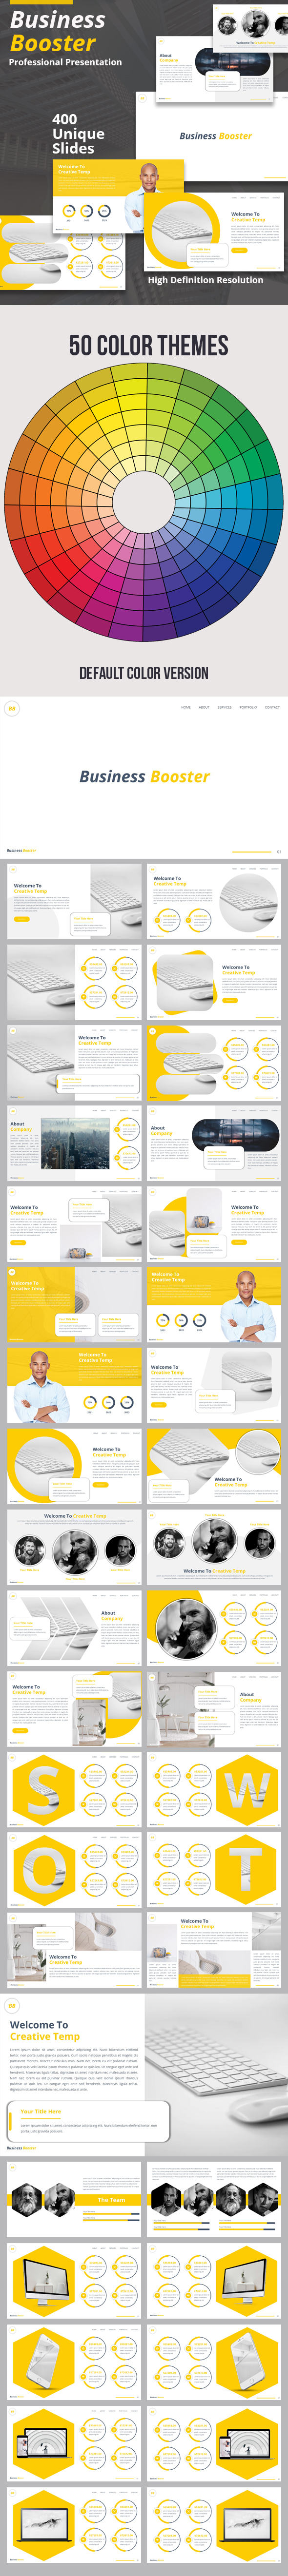 Business Booster Powerpoint Presentation Template